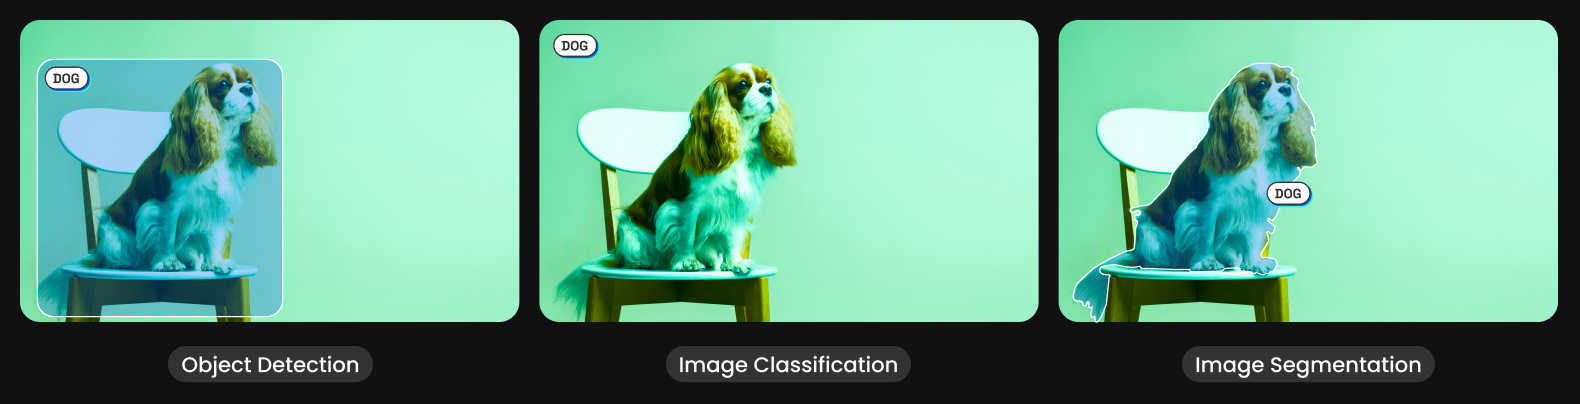 Understanding 3 subsets of image recognition with an image of a dog sitting on a chair.